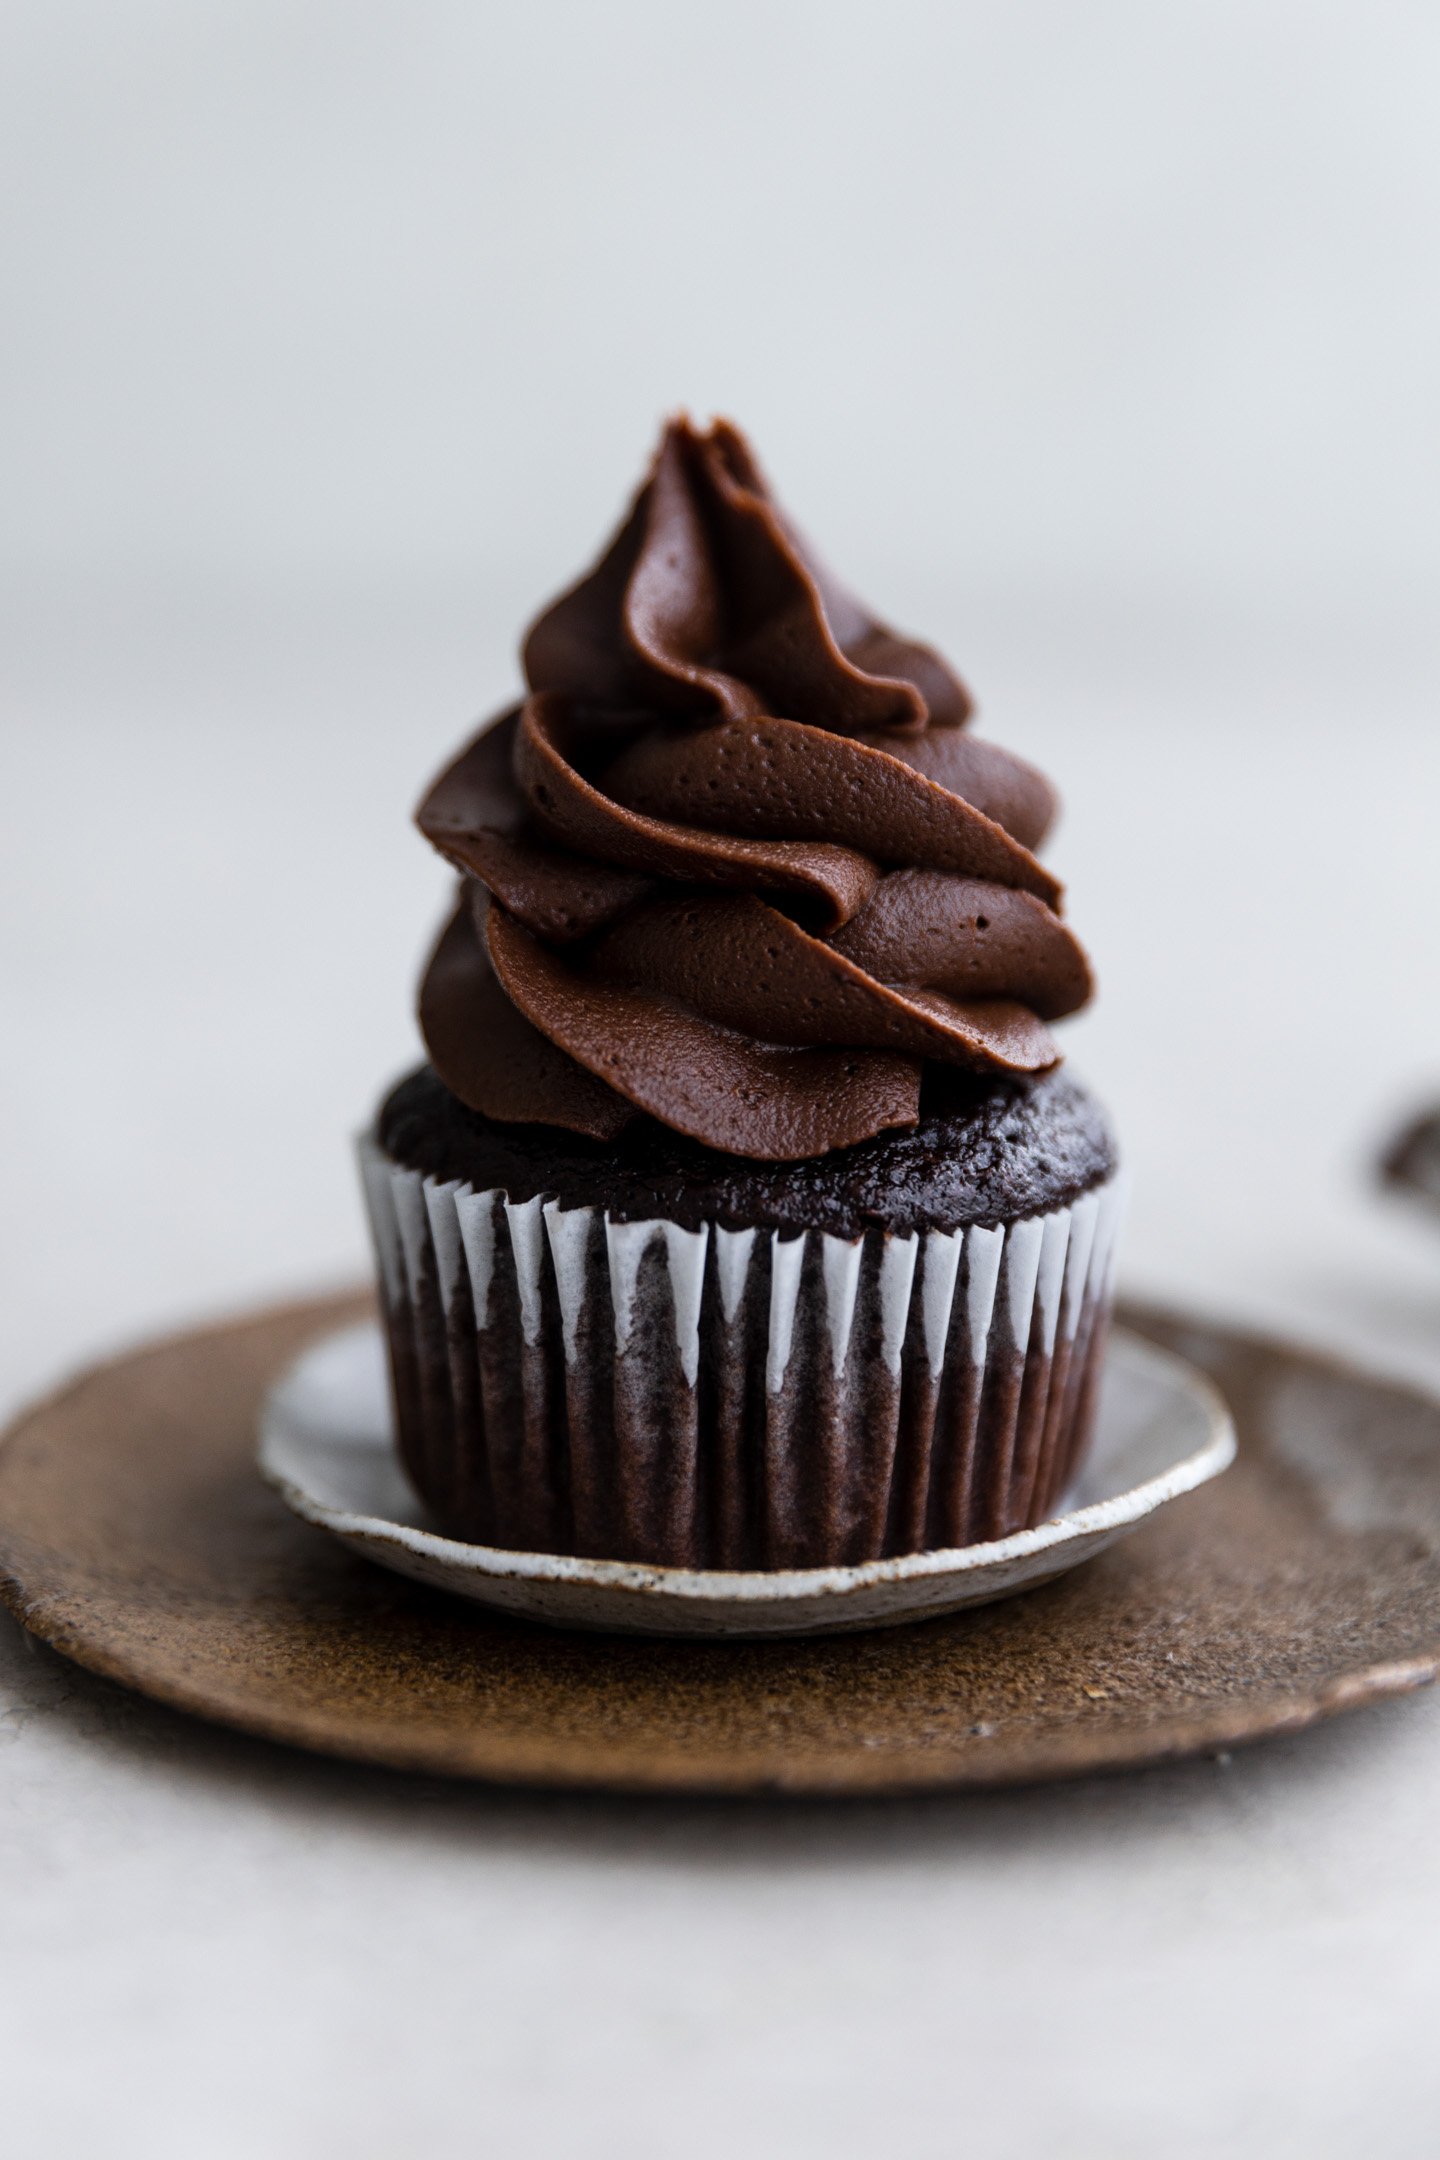 A chocolate cupcake with chocolate fudge frosting on small layered plates.